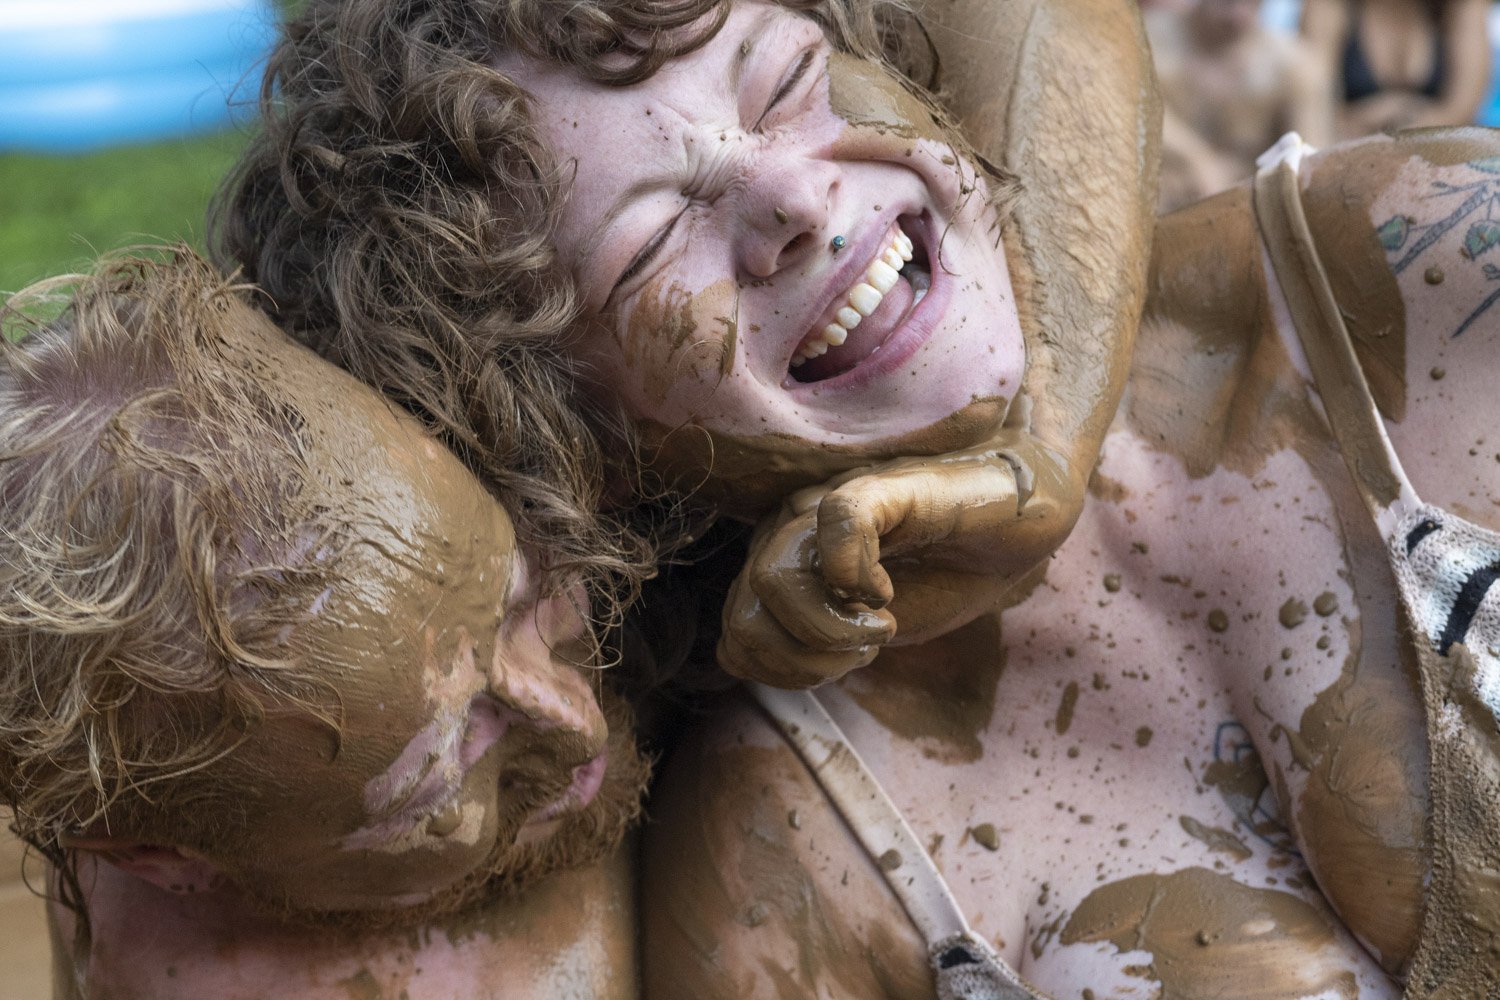  Two kiddie pools and a truckload of pulverized earth from the speedway transform a Bloomington, Ind. backyard into a mud wrestling arena where participants in the Dirty Boi Pit Smash face off to raise  funds for gender affirming surgeries.  